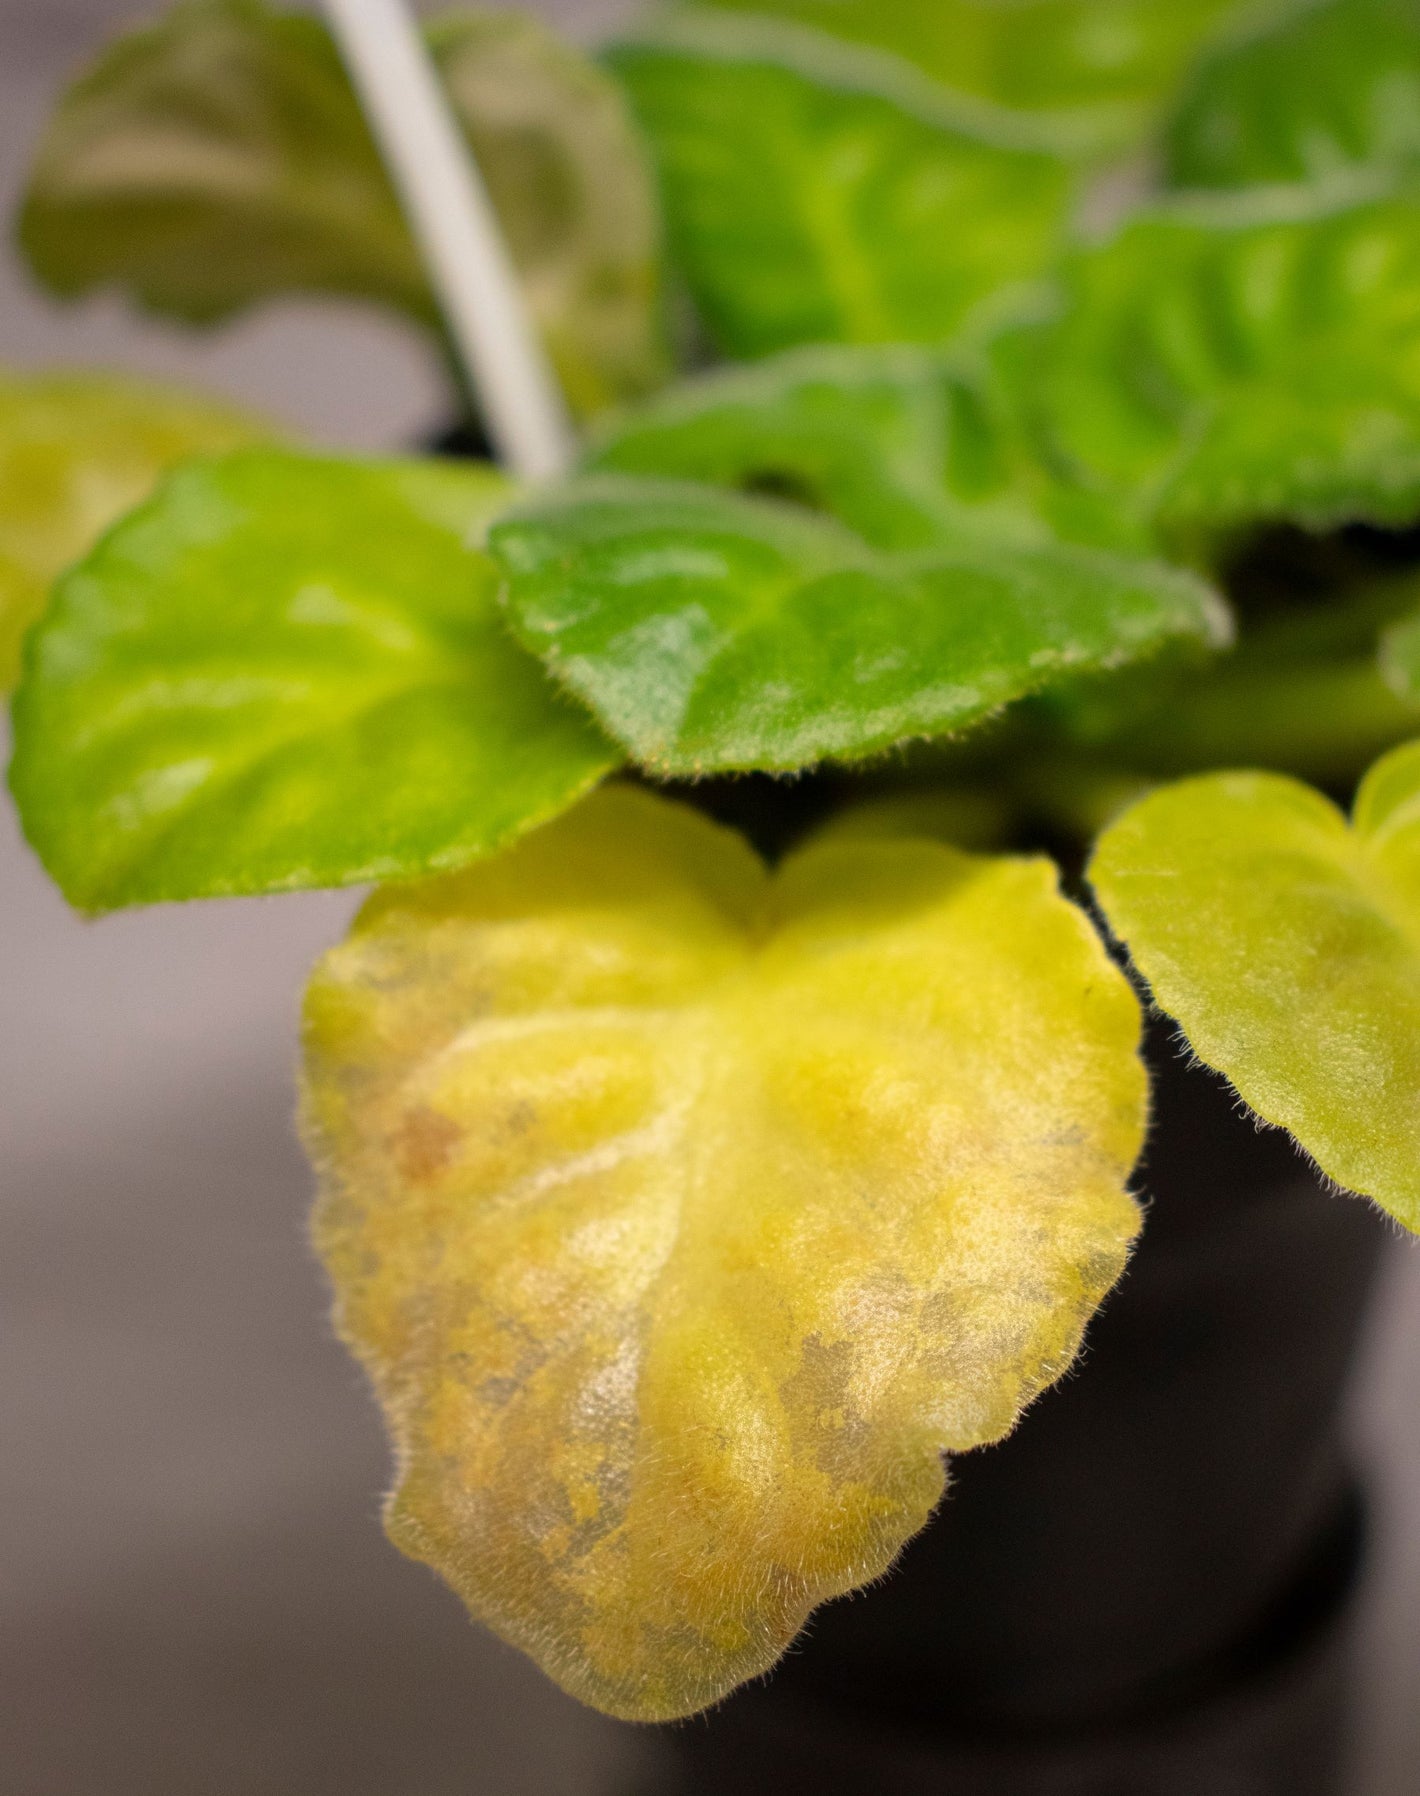 The image shows a yellow leaf of an African violet plant, with other nearby leaves also turning yellow due to overwatering 